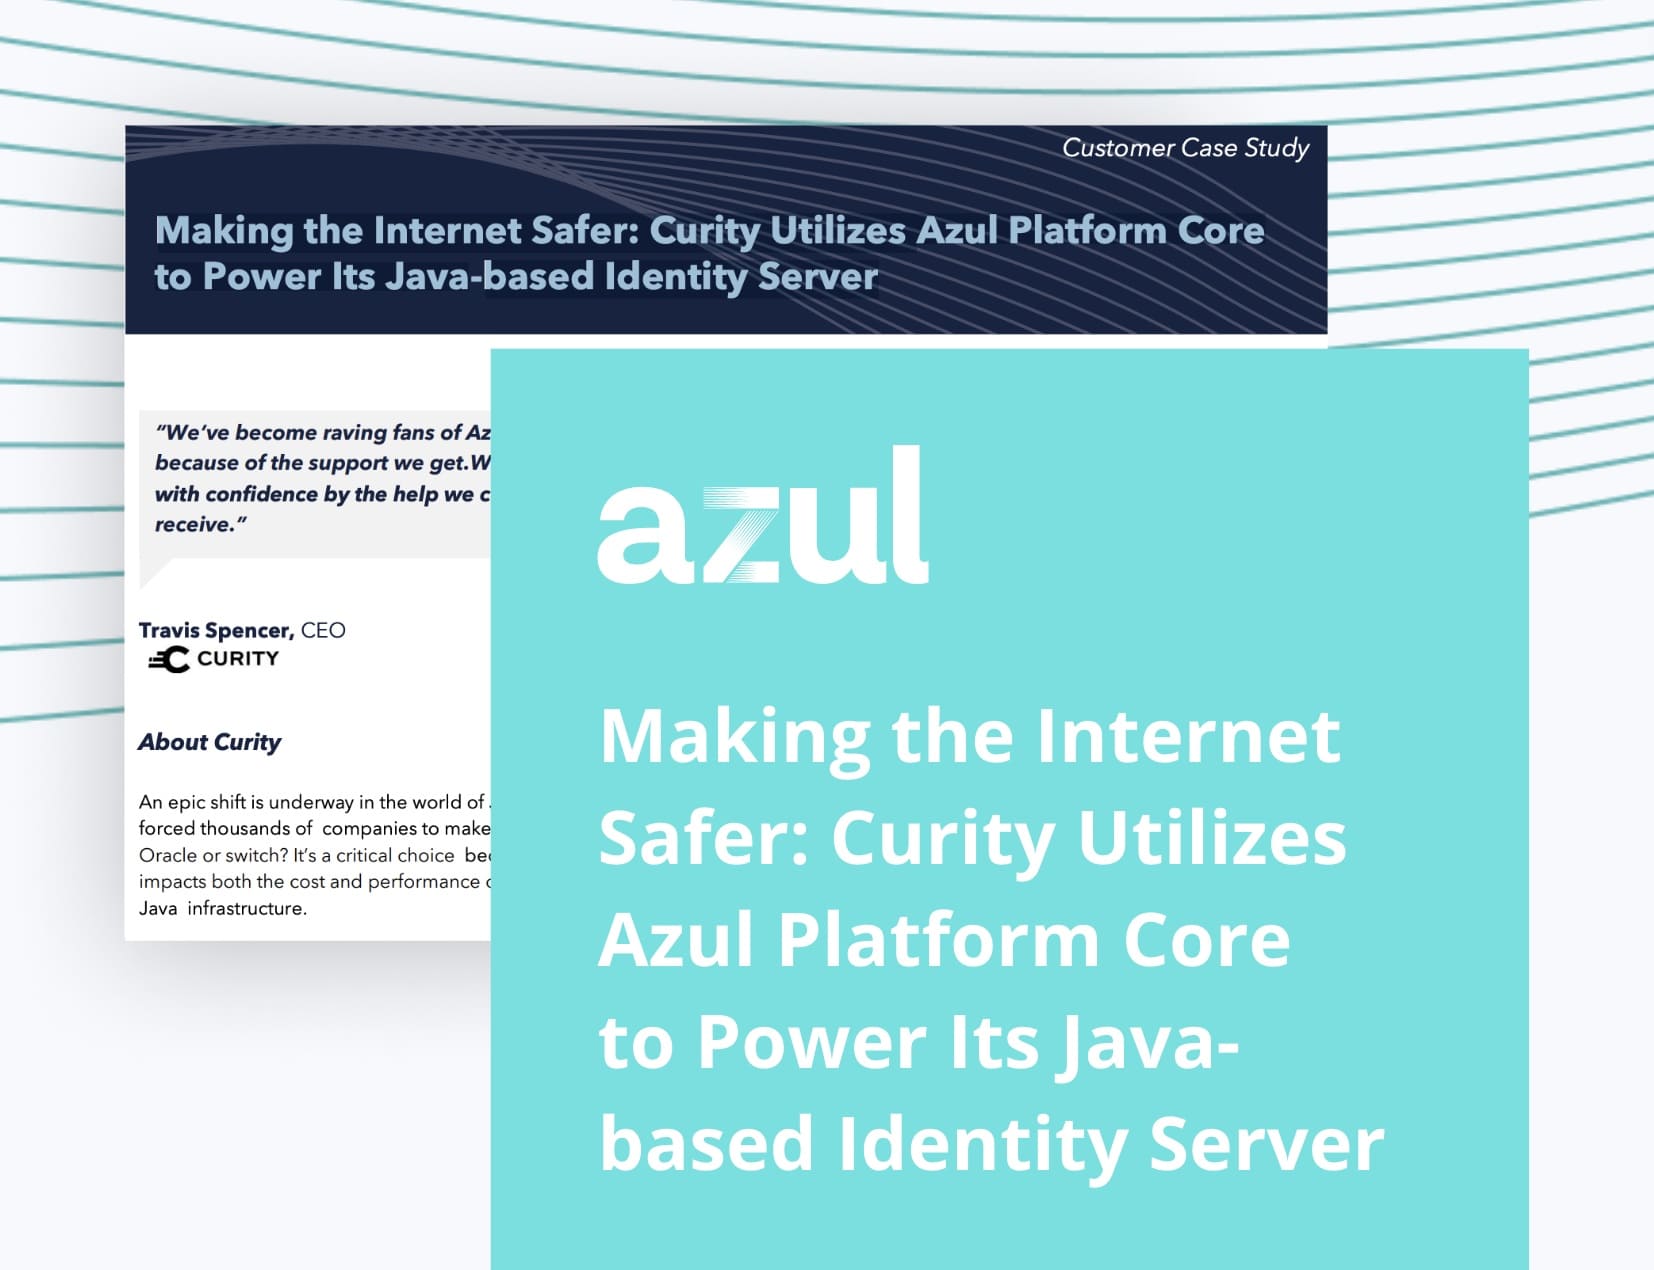 Making the Internet Safer - Curity Utilizes Azul Platform Core to Power Its Java-based Identity Server